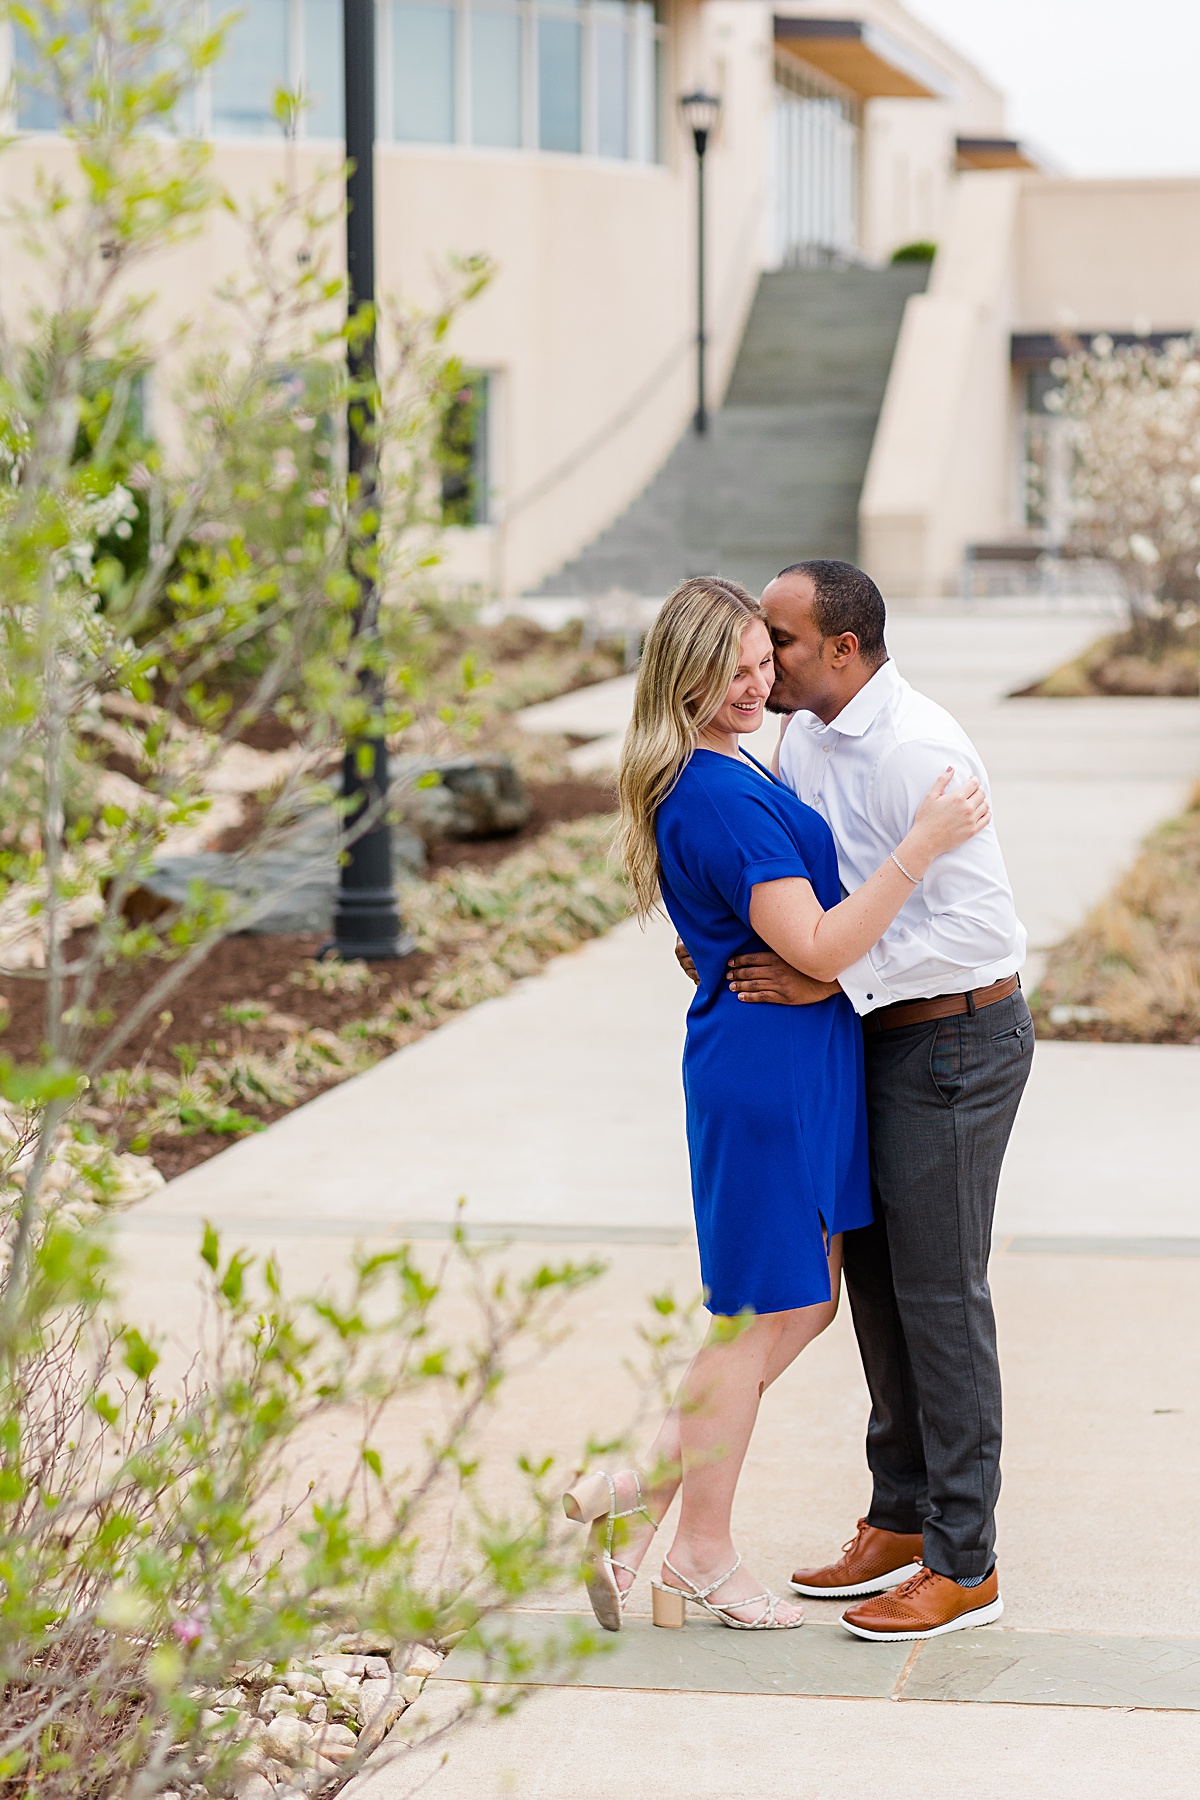 This was a first for us to have an engagement session at a university basketball court!! We loved exploring Liberty University's campus with these two their engagement session!